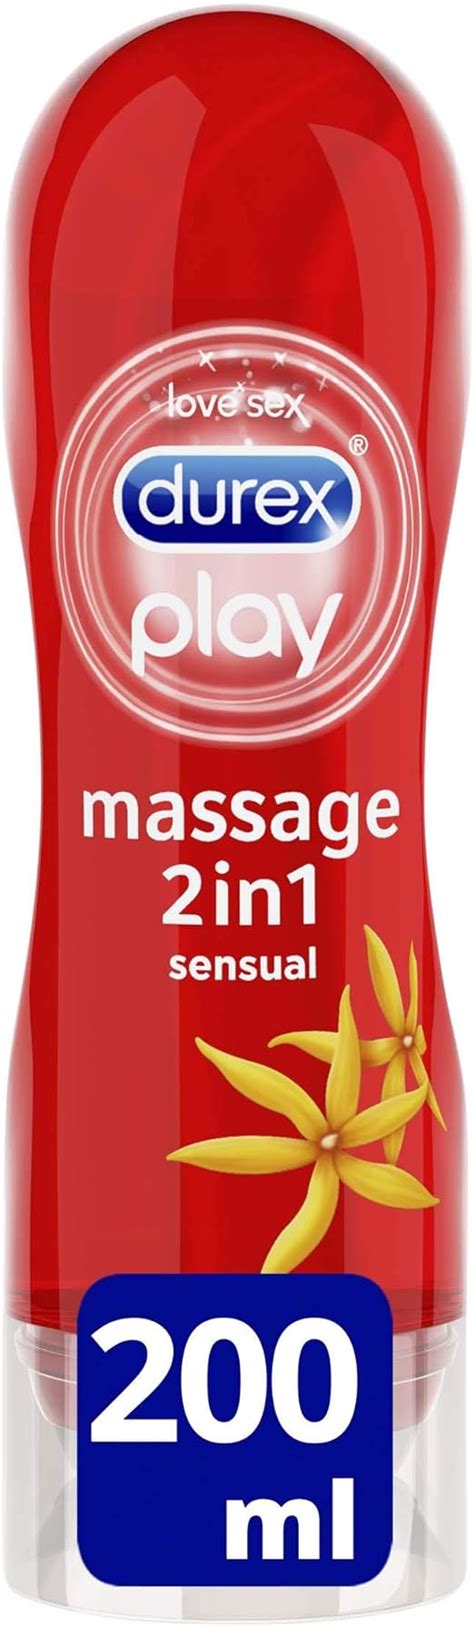 Durex Massage Lube In Sensual Lubricant Gel With Ylang Ylang